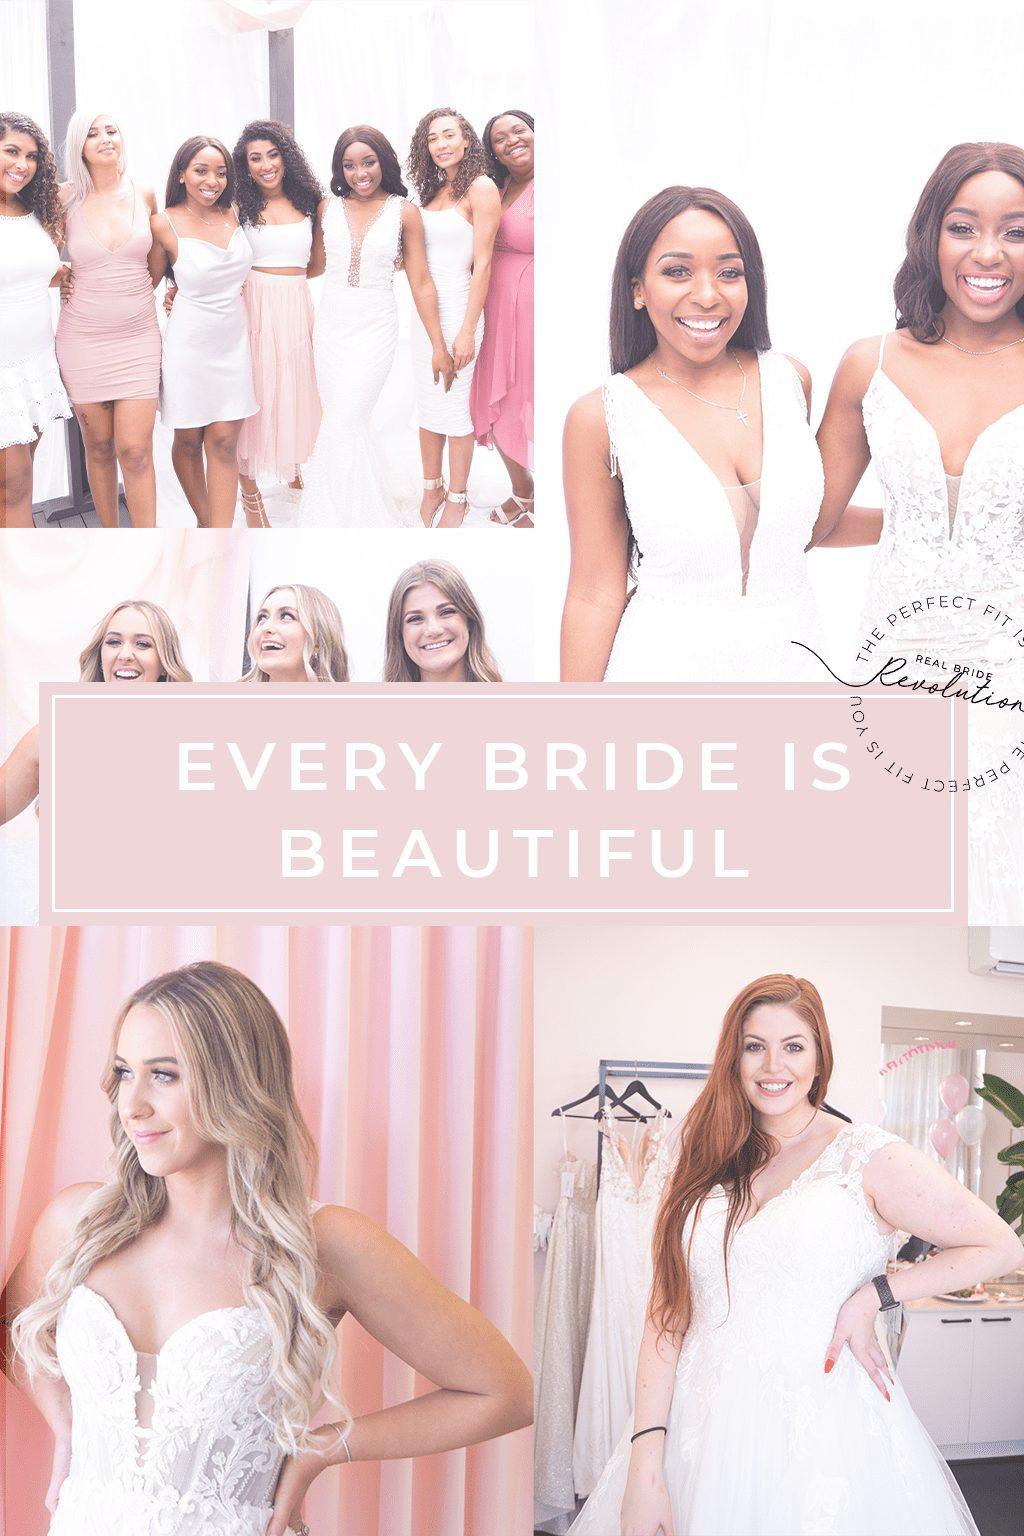 Every Bride is Beautiful #realbriderevolution - White Lily Couture